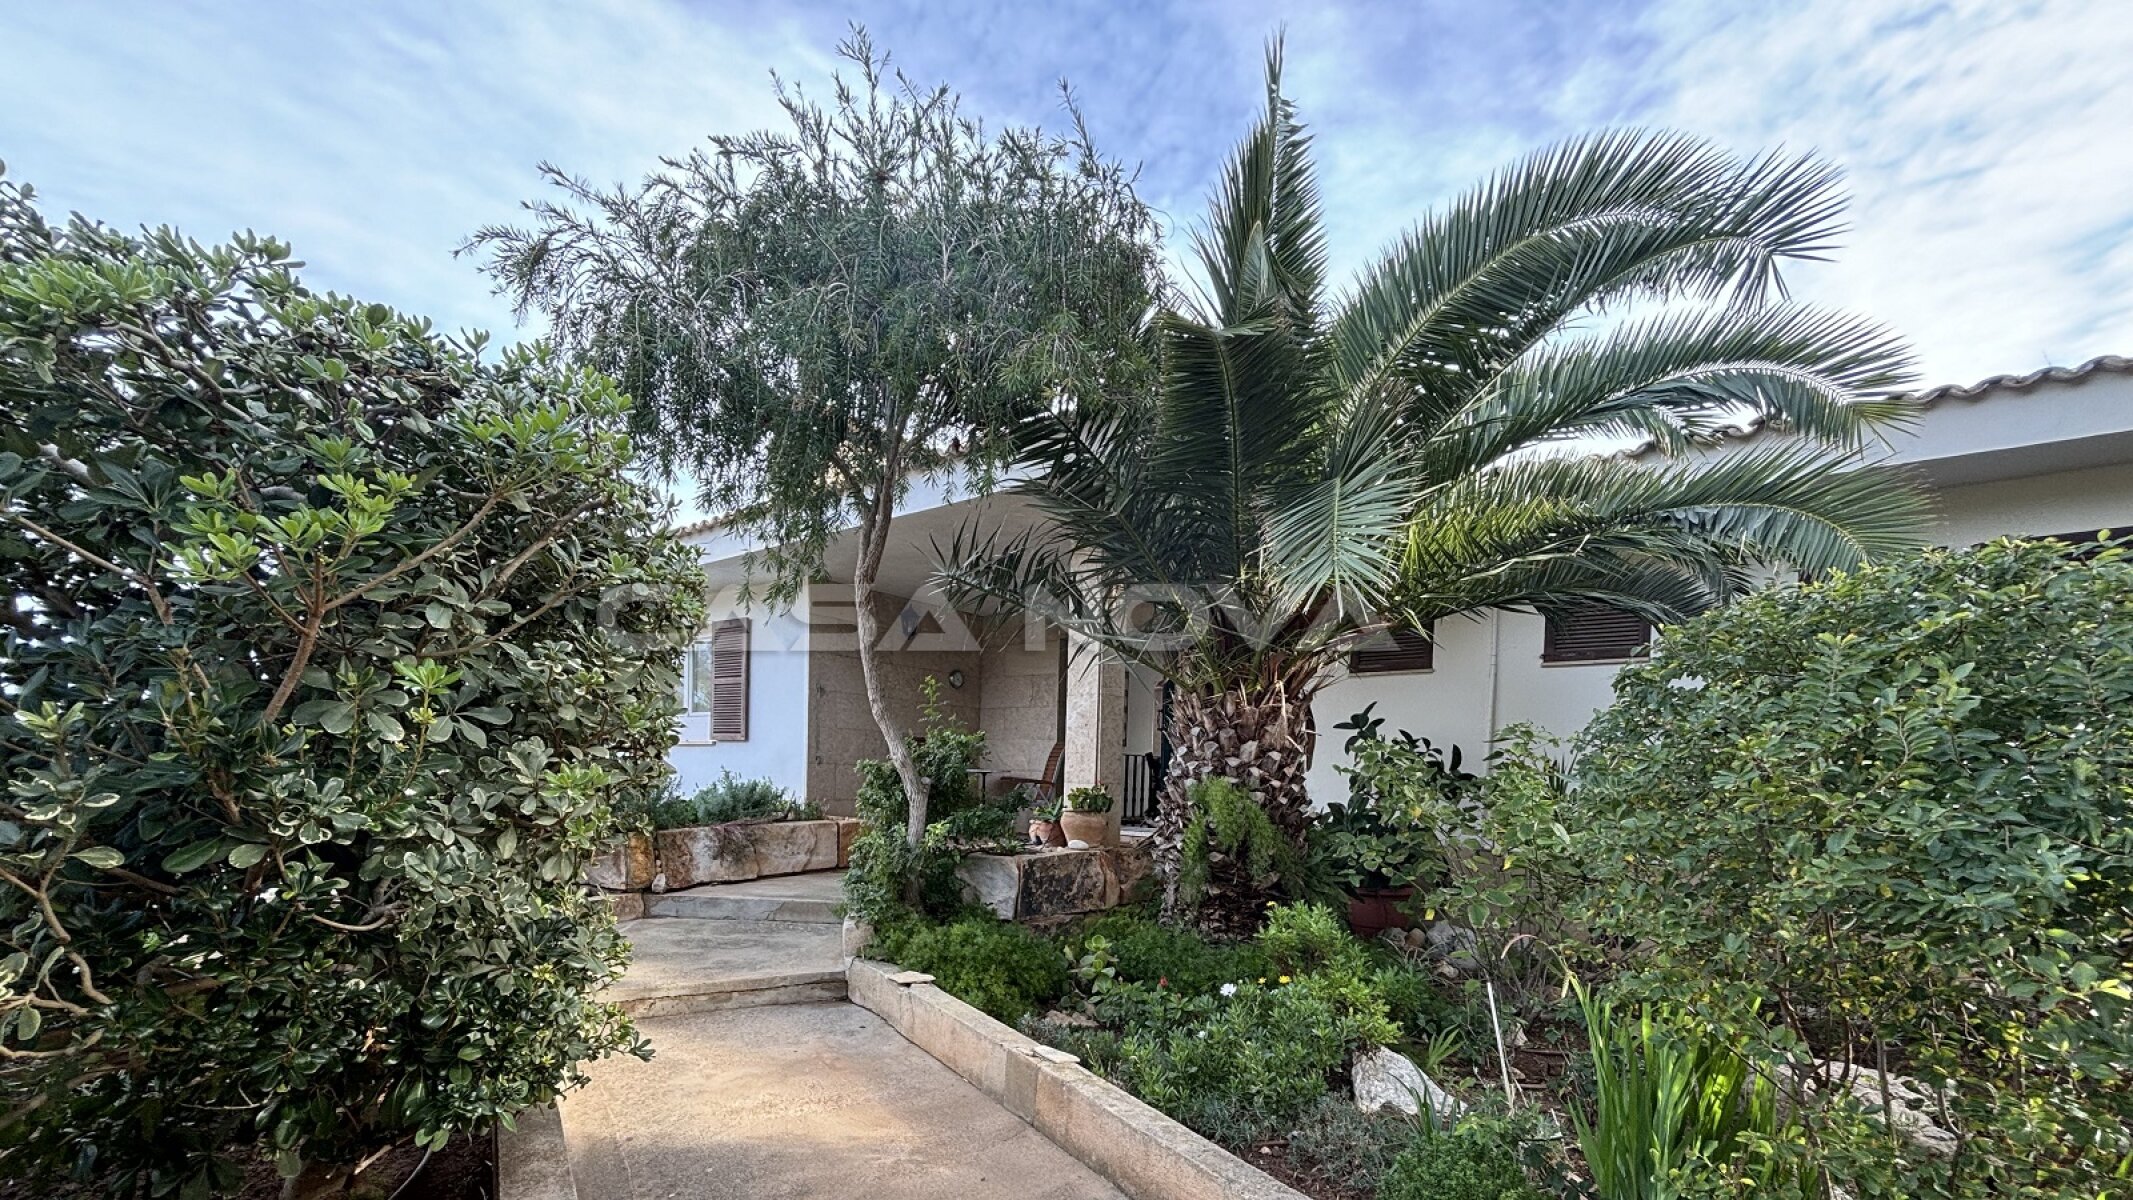 Mediterranean villa with lots of potential in a quiet residential area